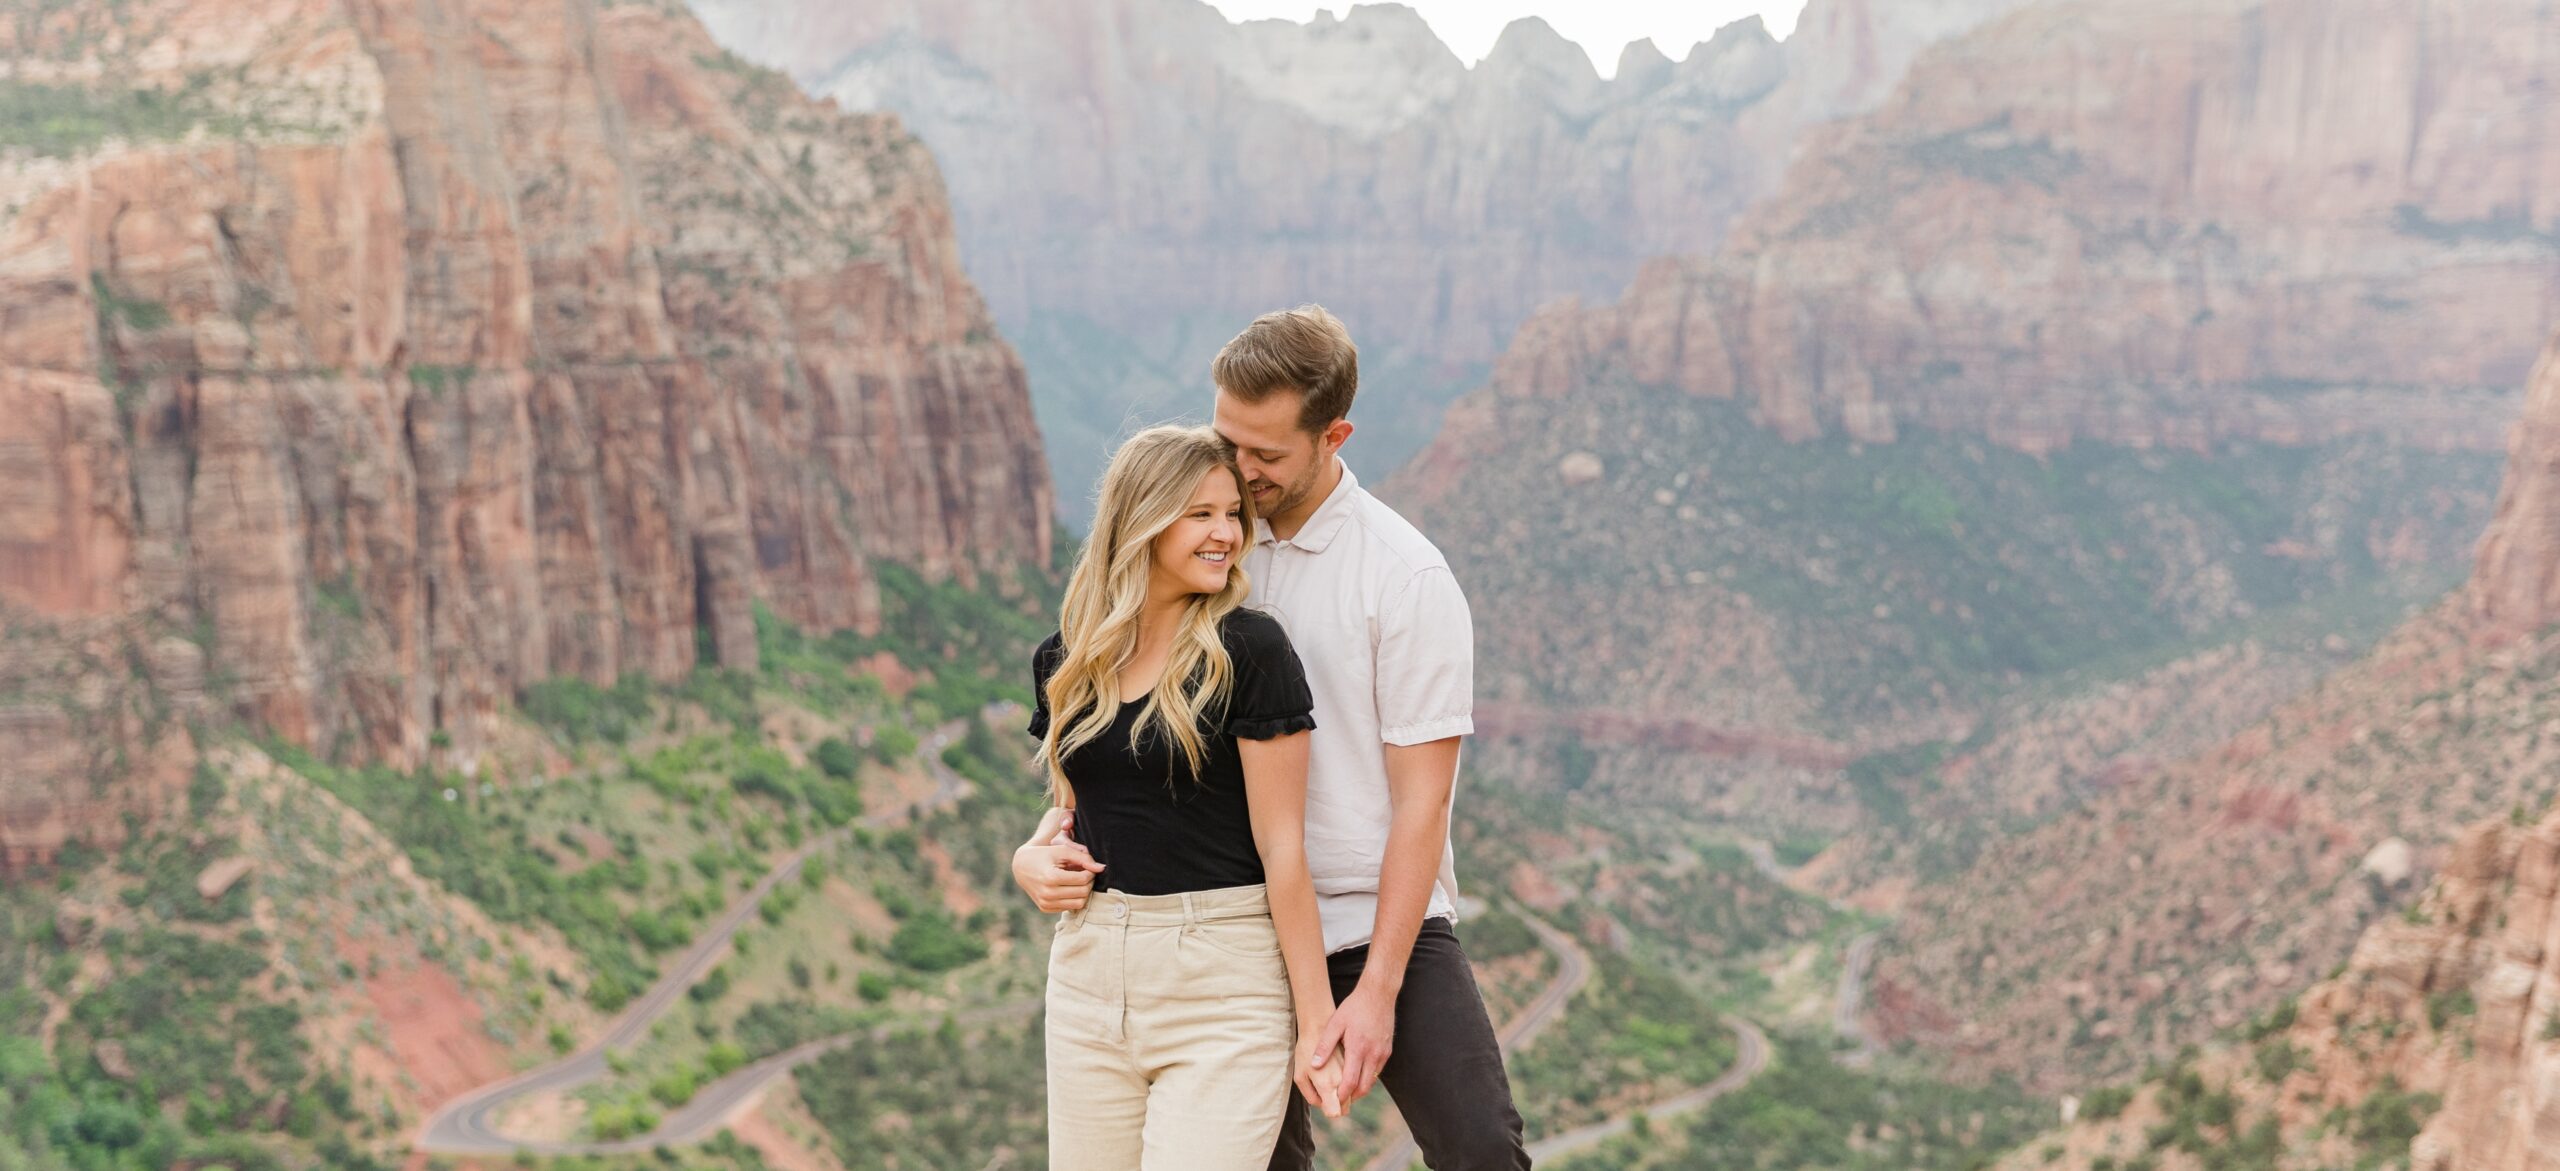 Zion canyon overlook portrait session, Southern Utah engagement session with red rocks